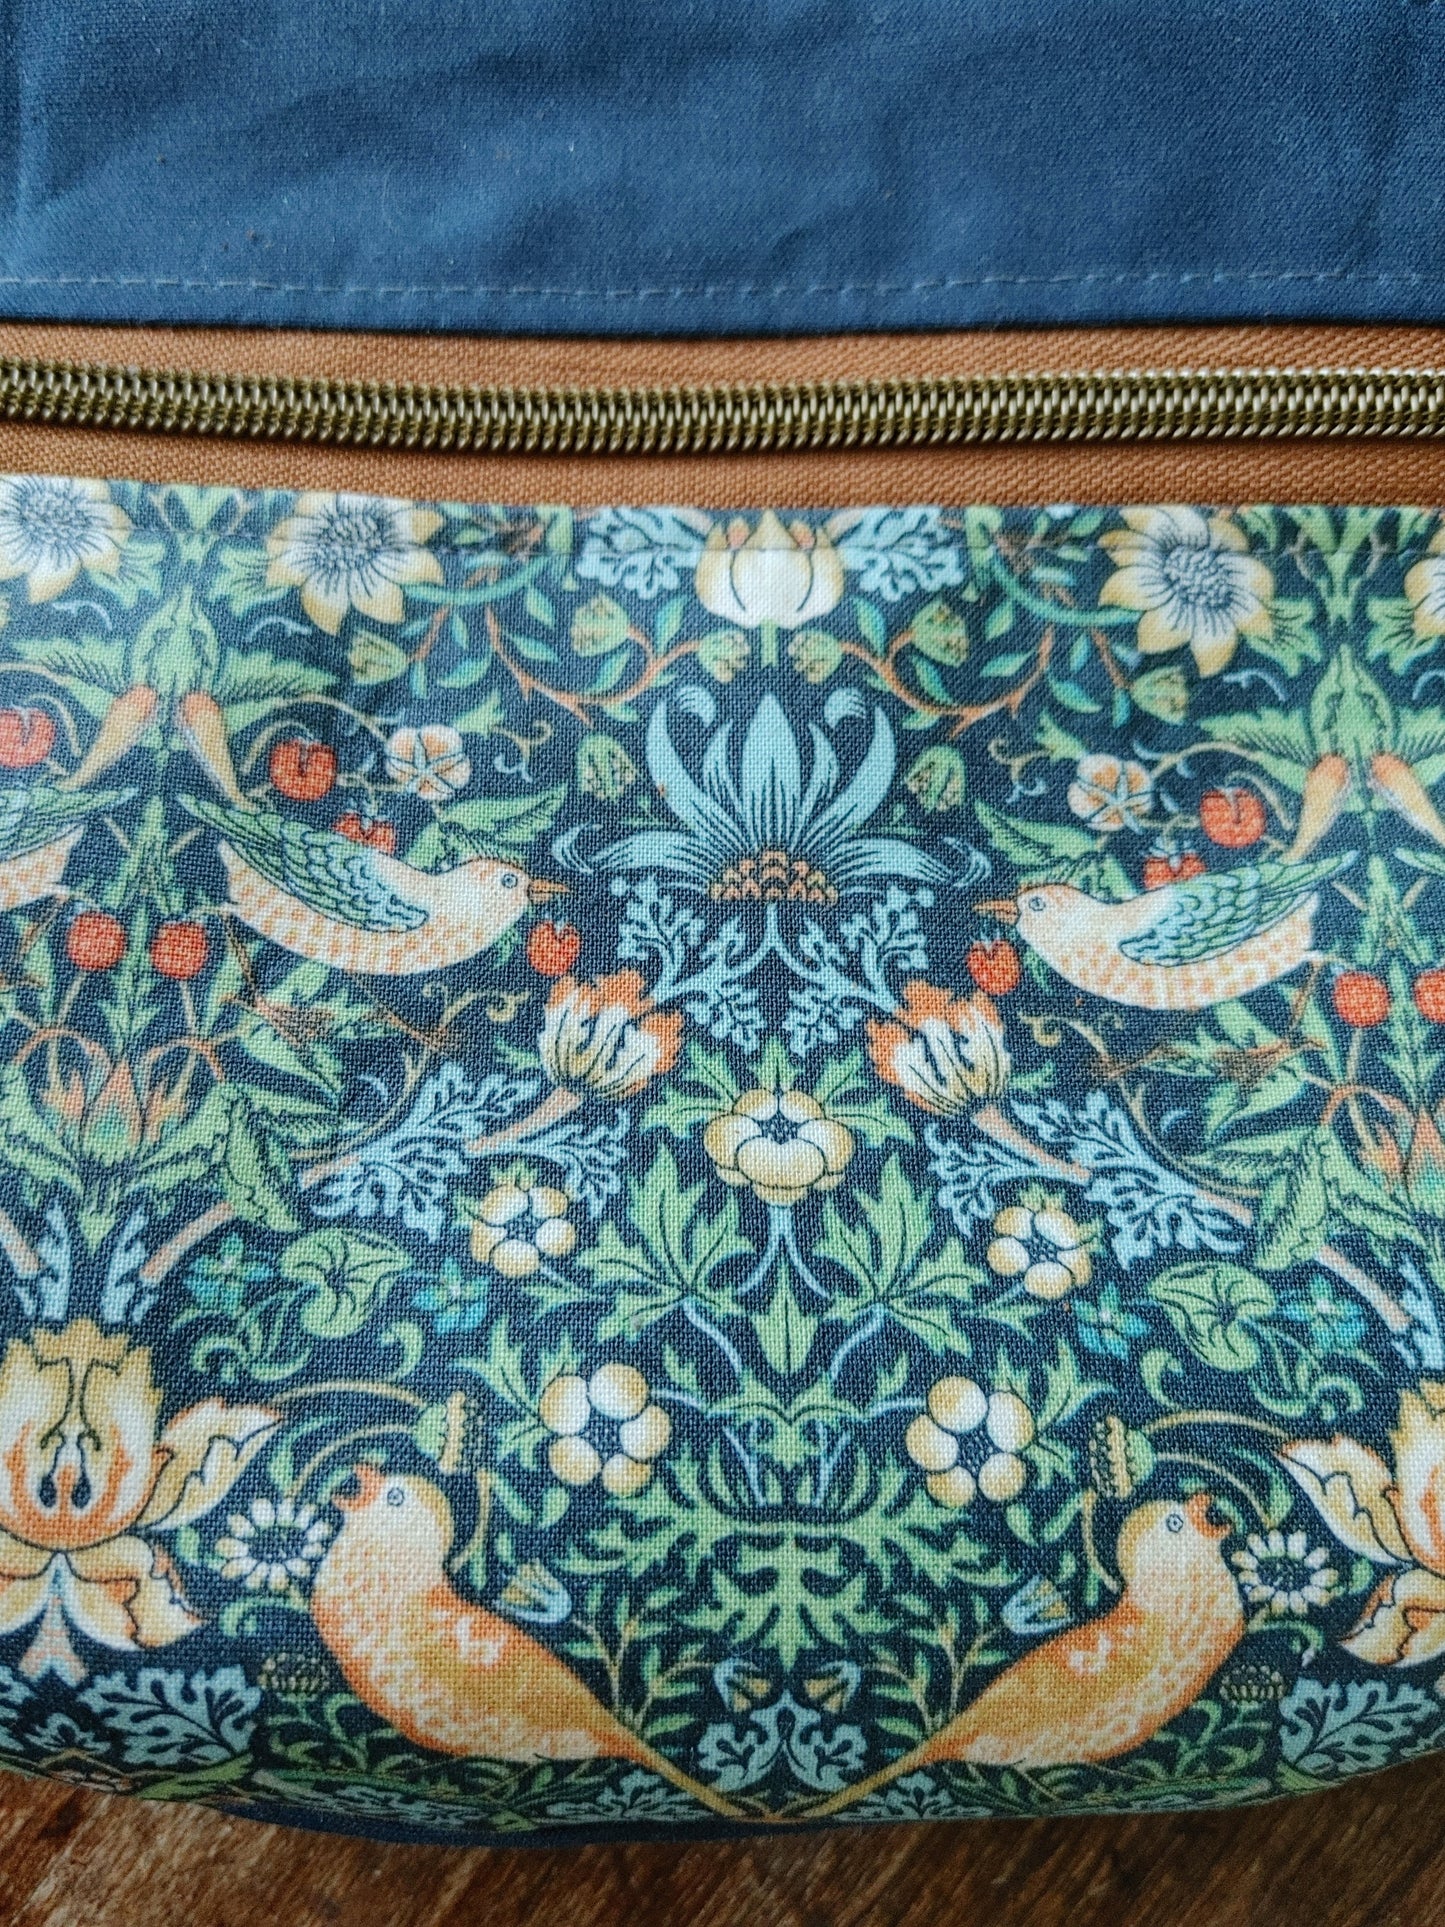 Detail of Handbag in Strawberry Thief by William Morris print and waxed canvas. Made in Canada by Plumage Studio Accessories